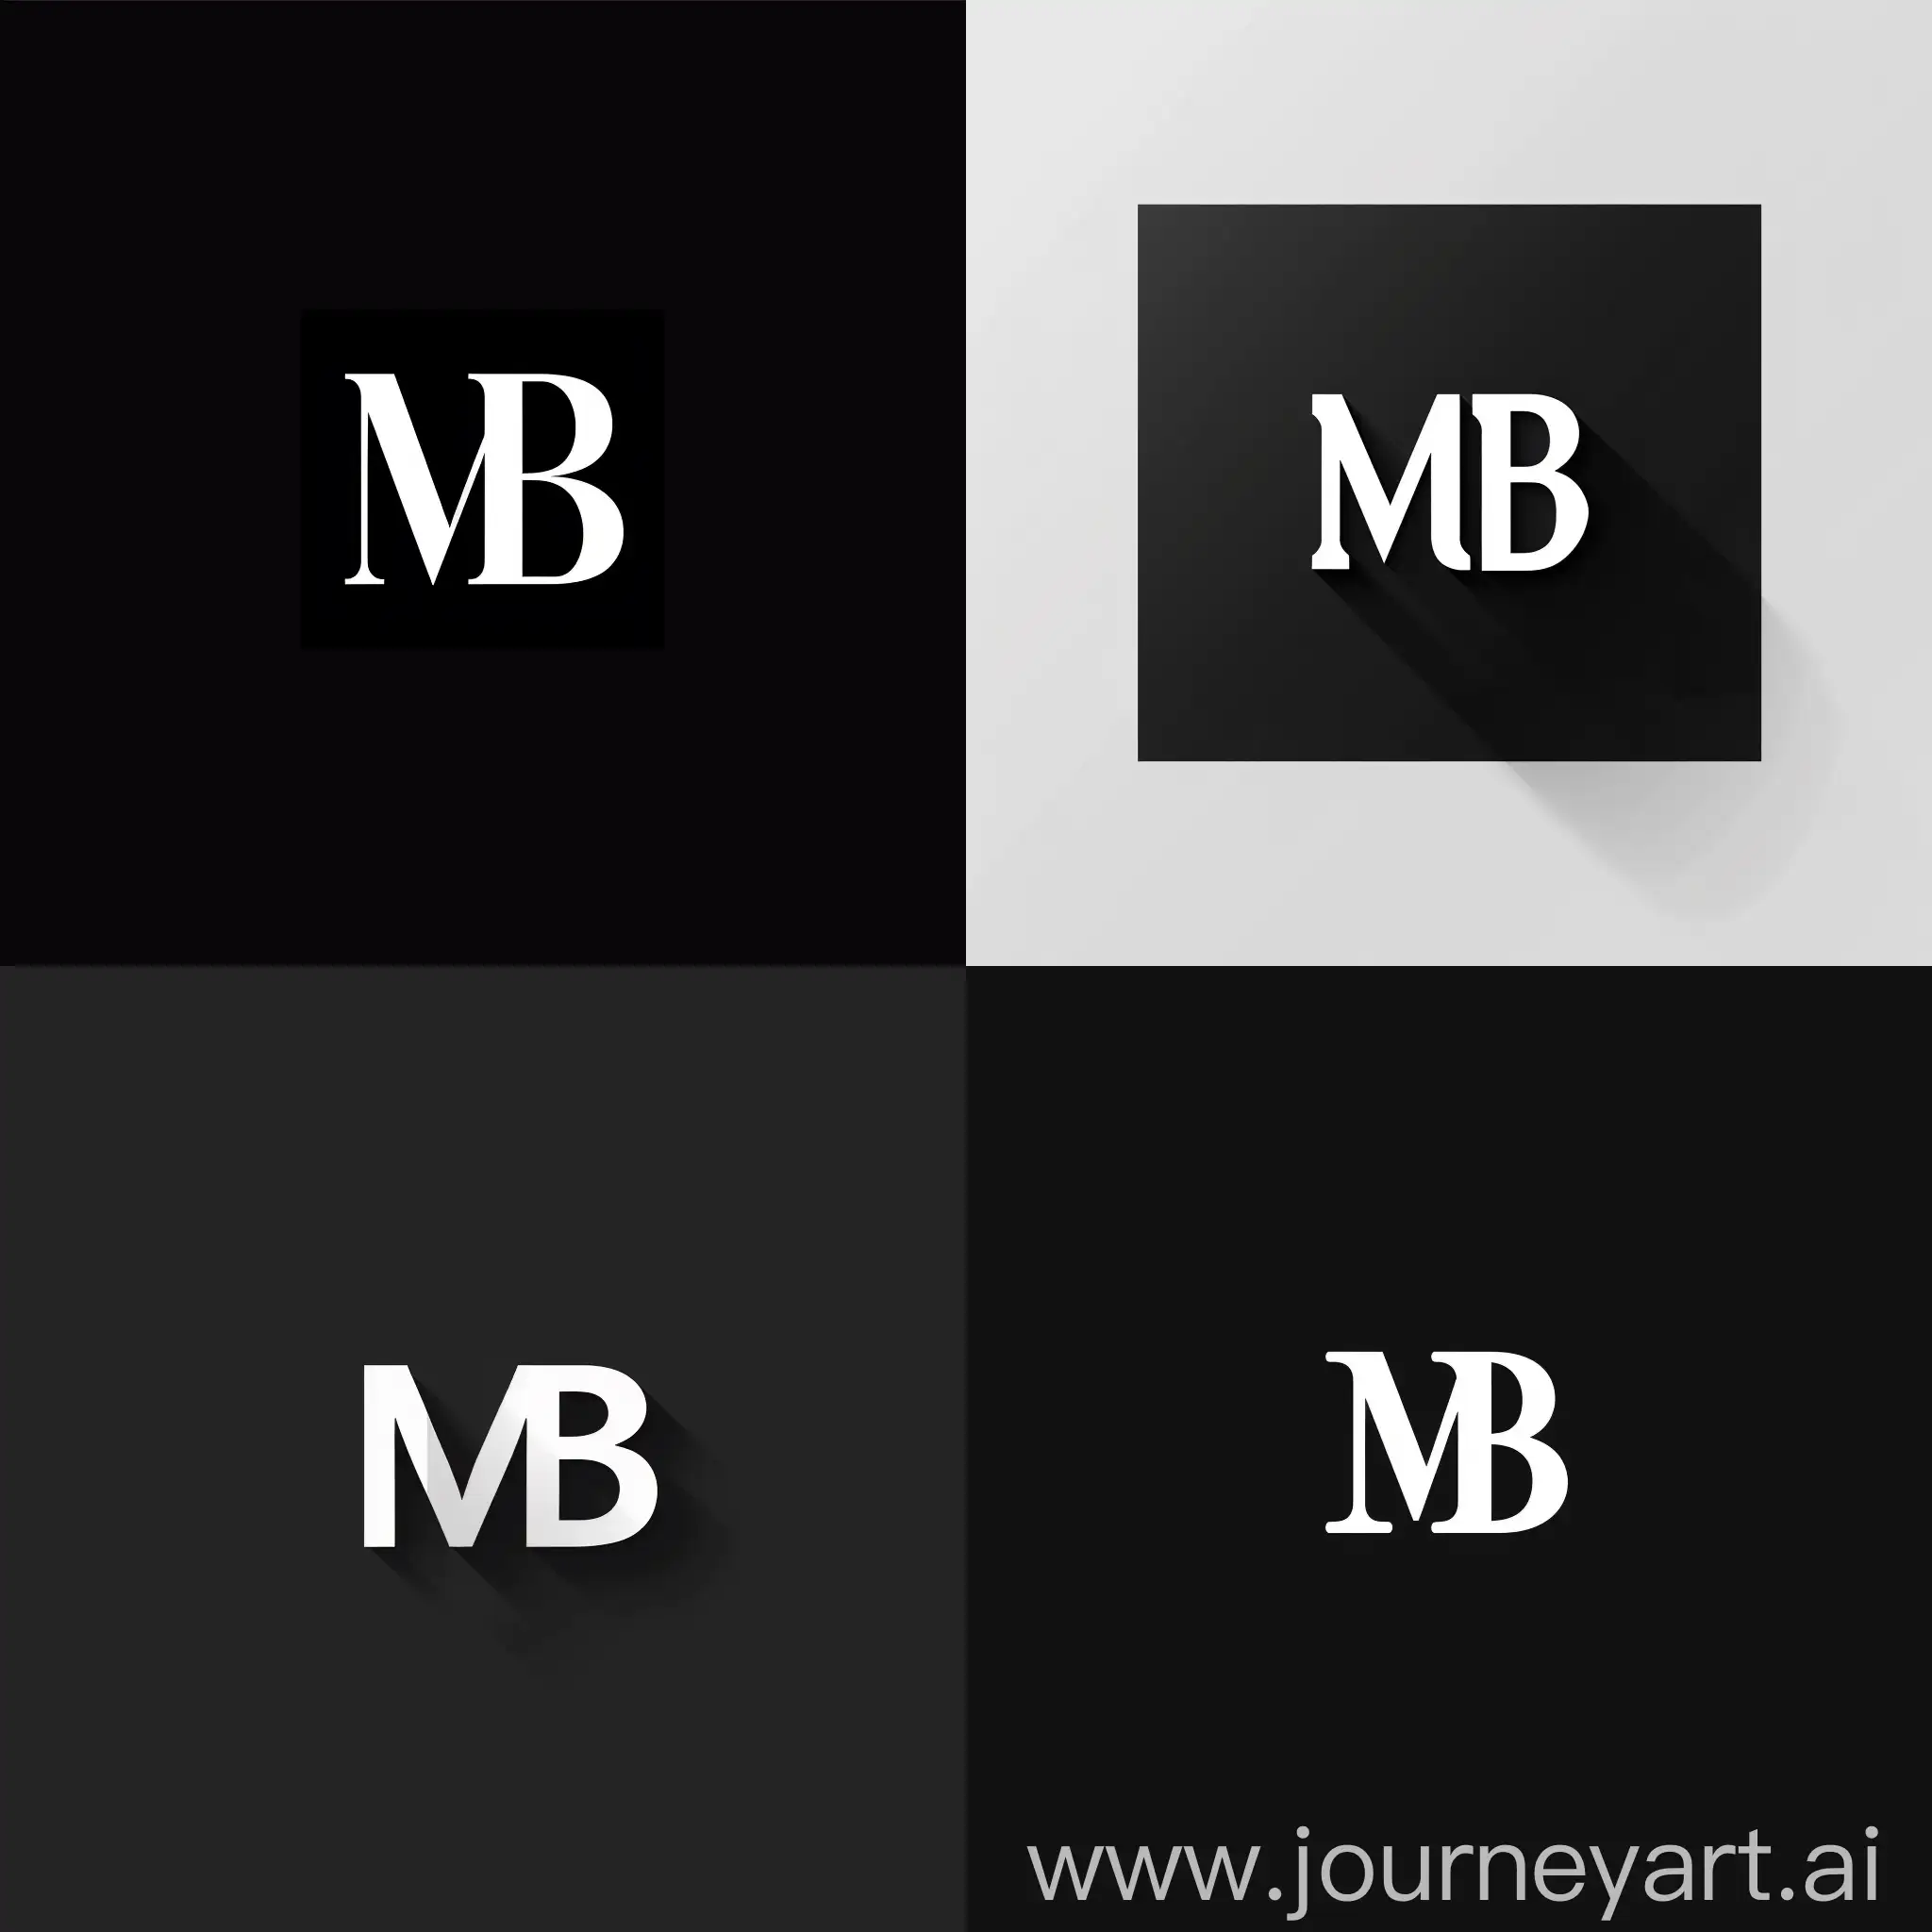 Stylish-Minimalist-Logo-Design-with-Interactive-MB-Letters-in-Black-and-White